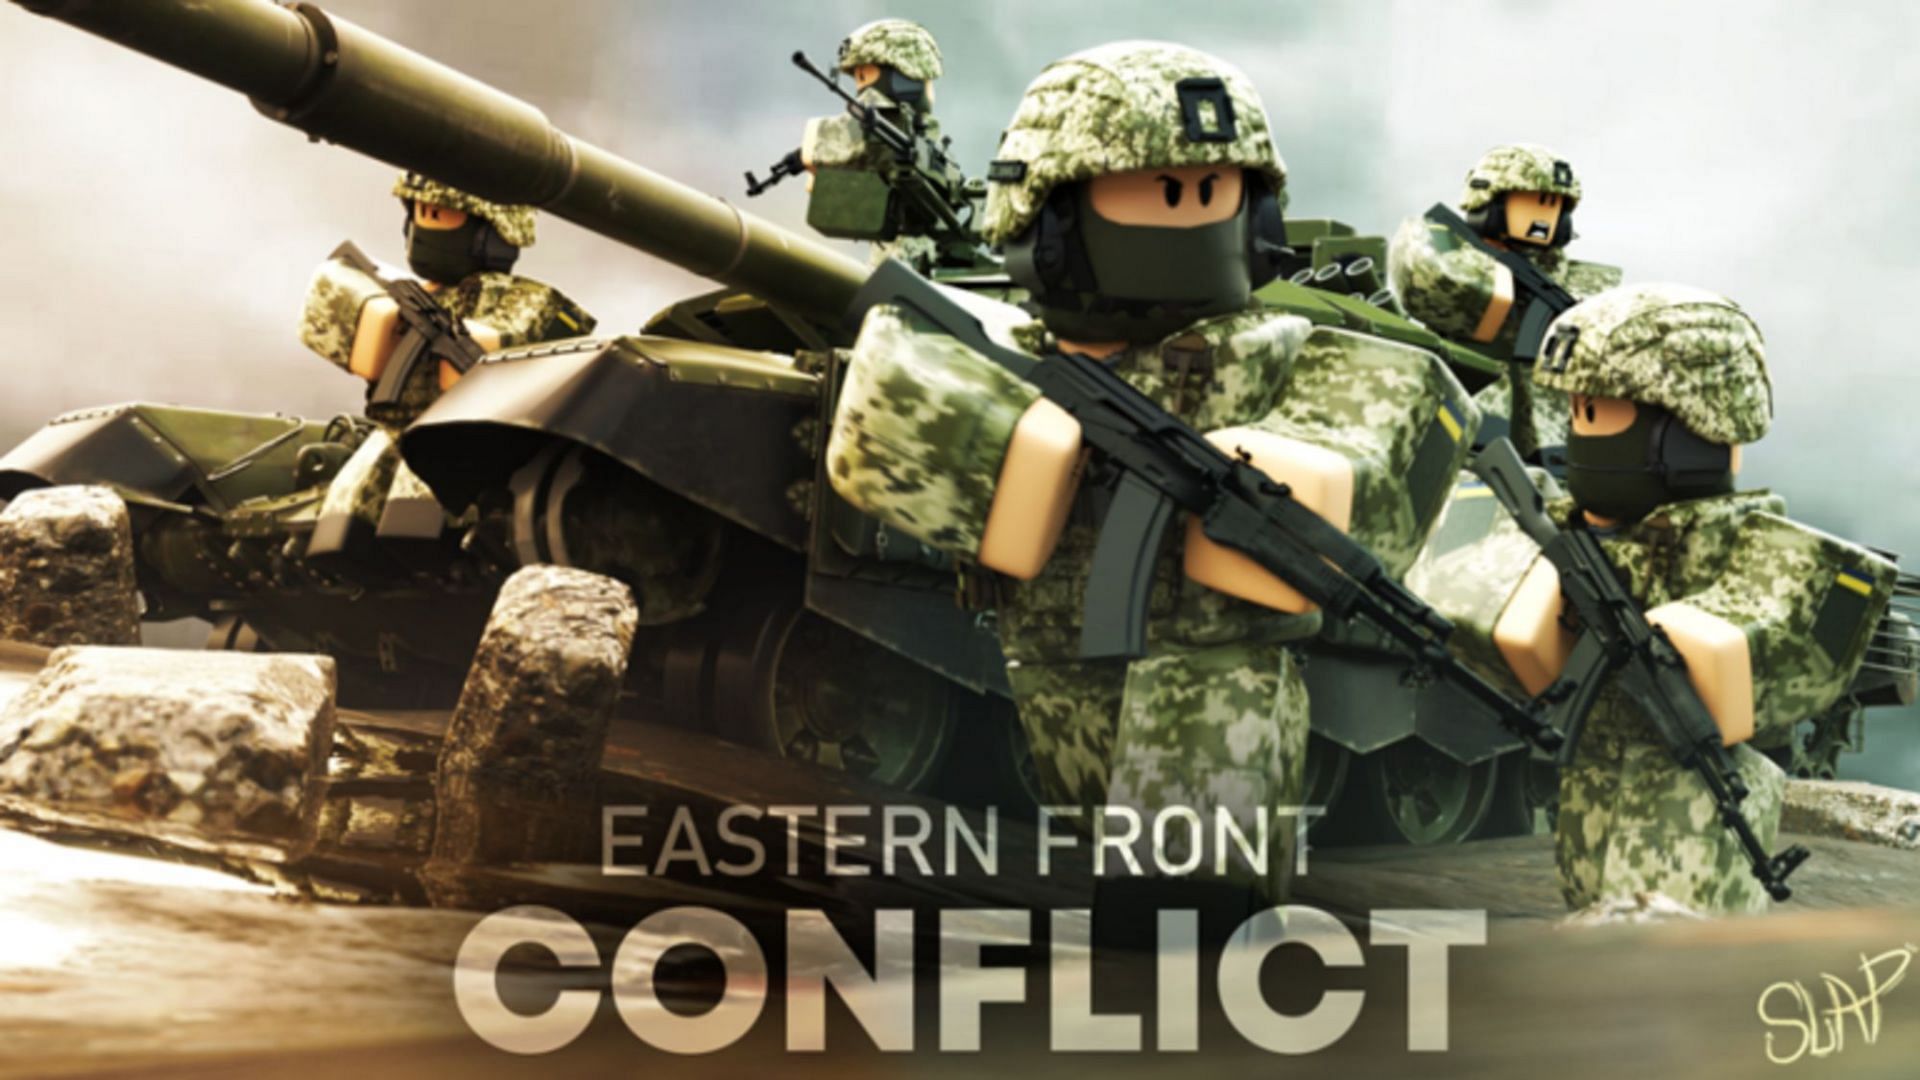 Learn to train troops and wins wars (Image via Roblox)